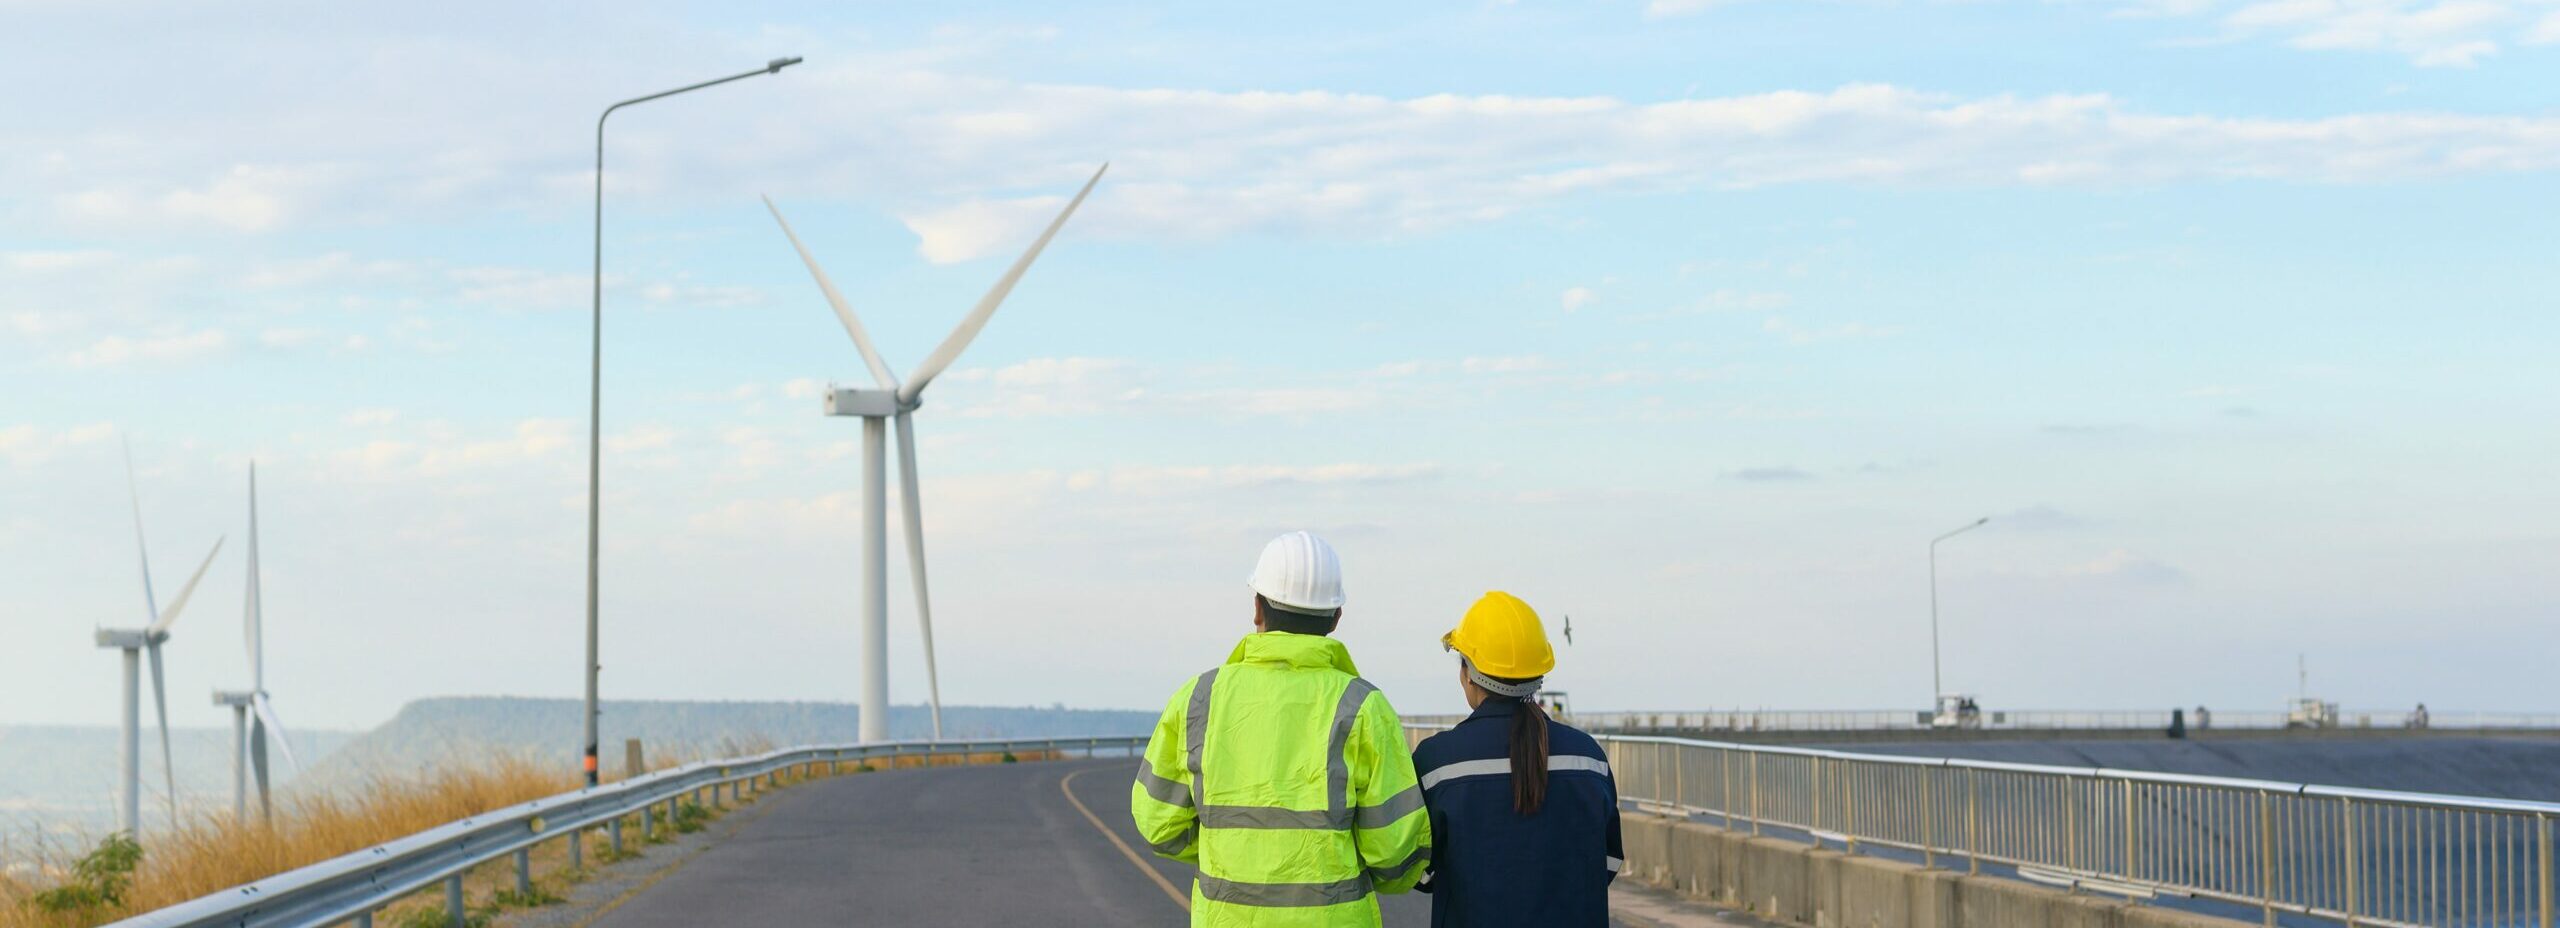 Wind park operation in Europe